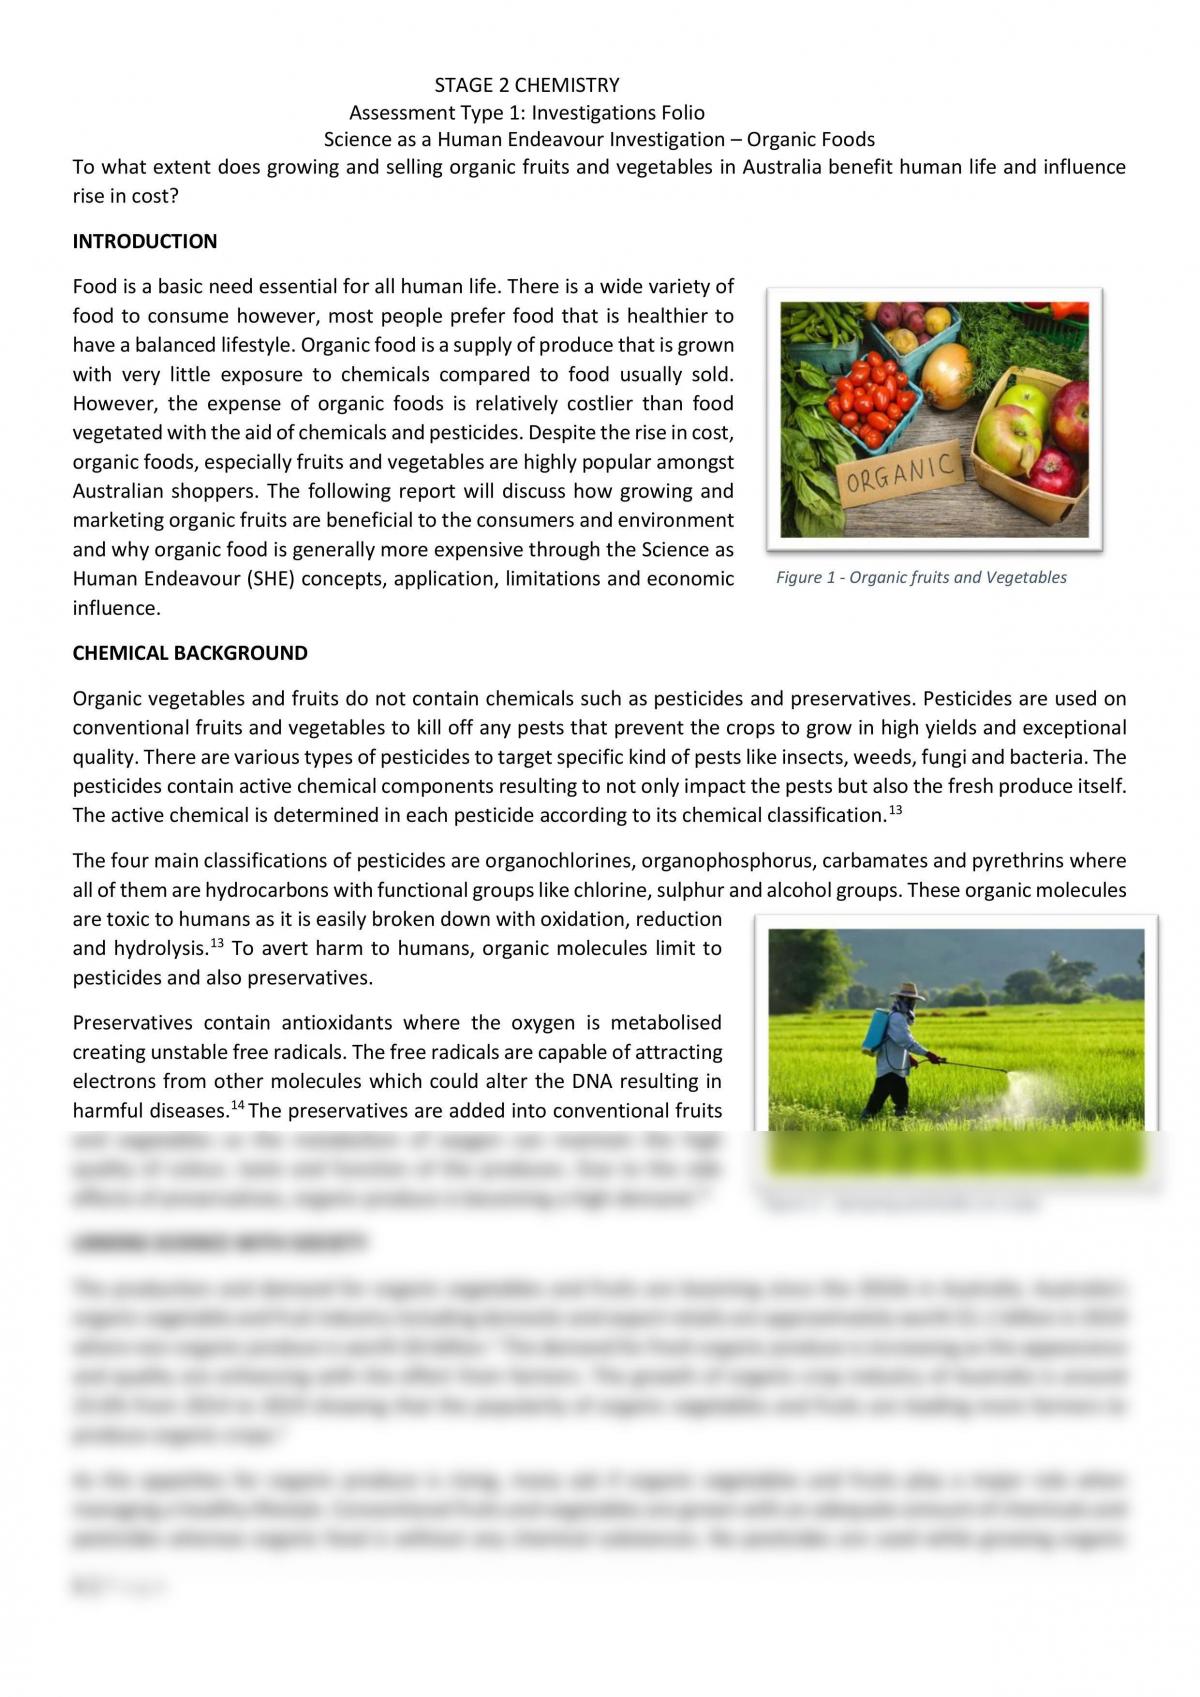 SHE - Organic Foods - Page 1